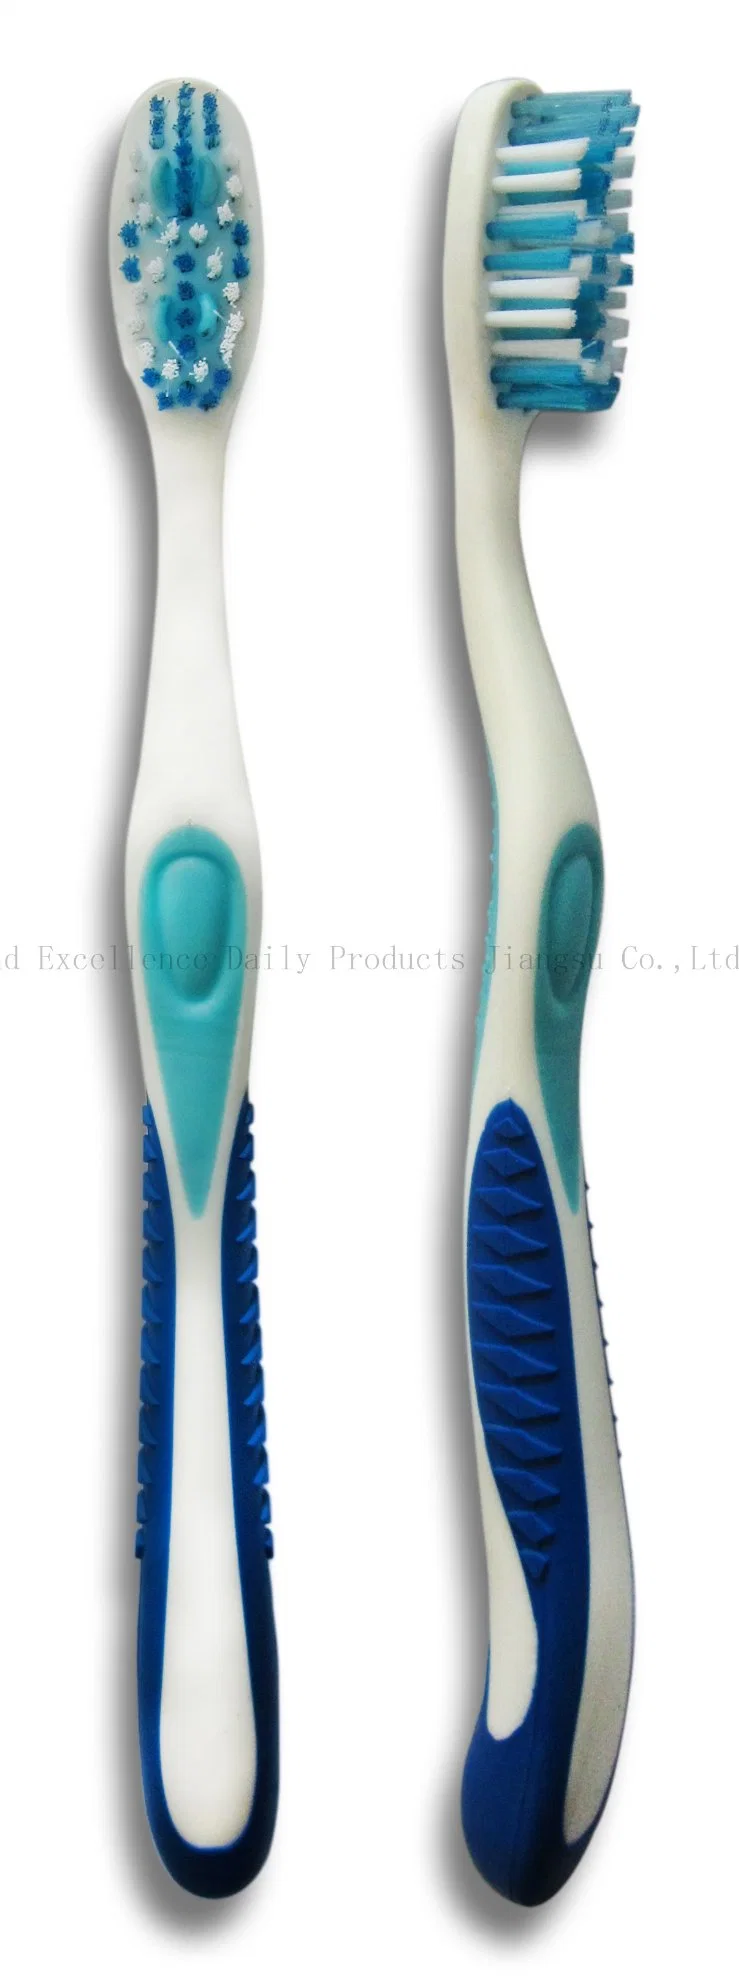 Multi-Function Manual Toothbrush for Complete Oral Care